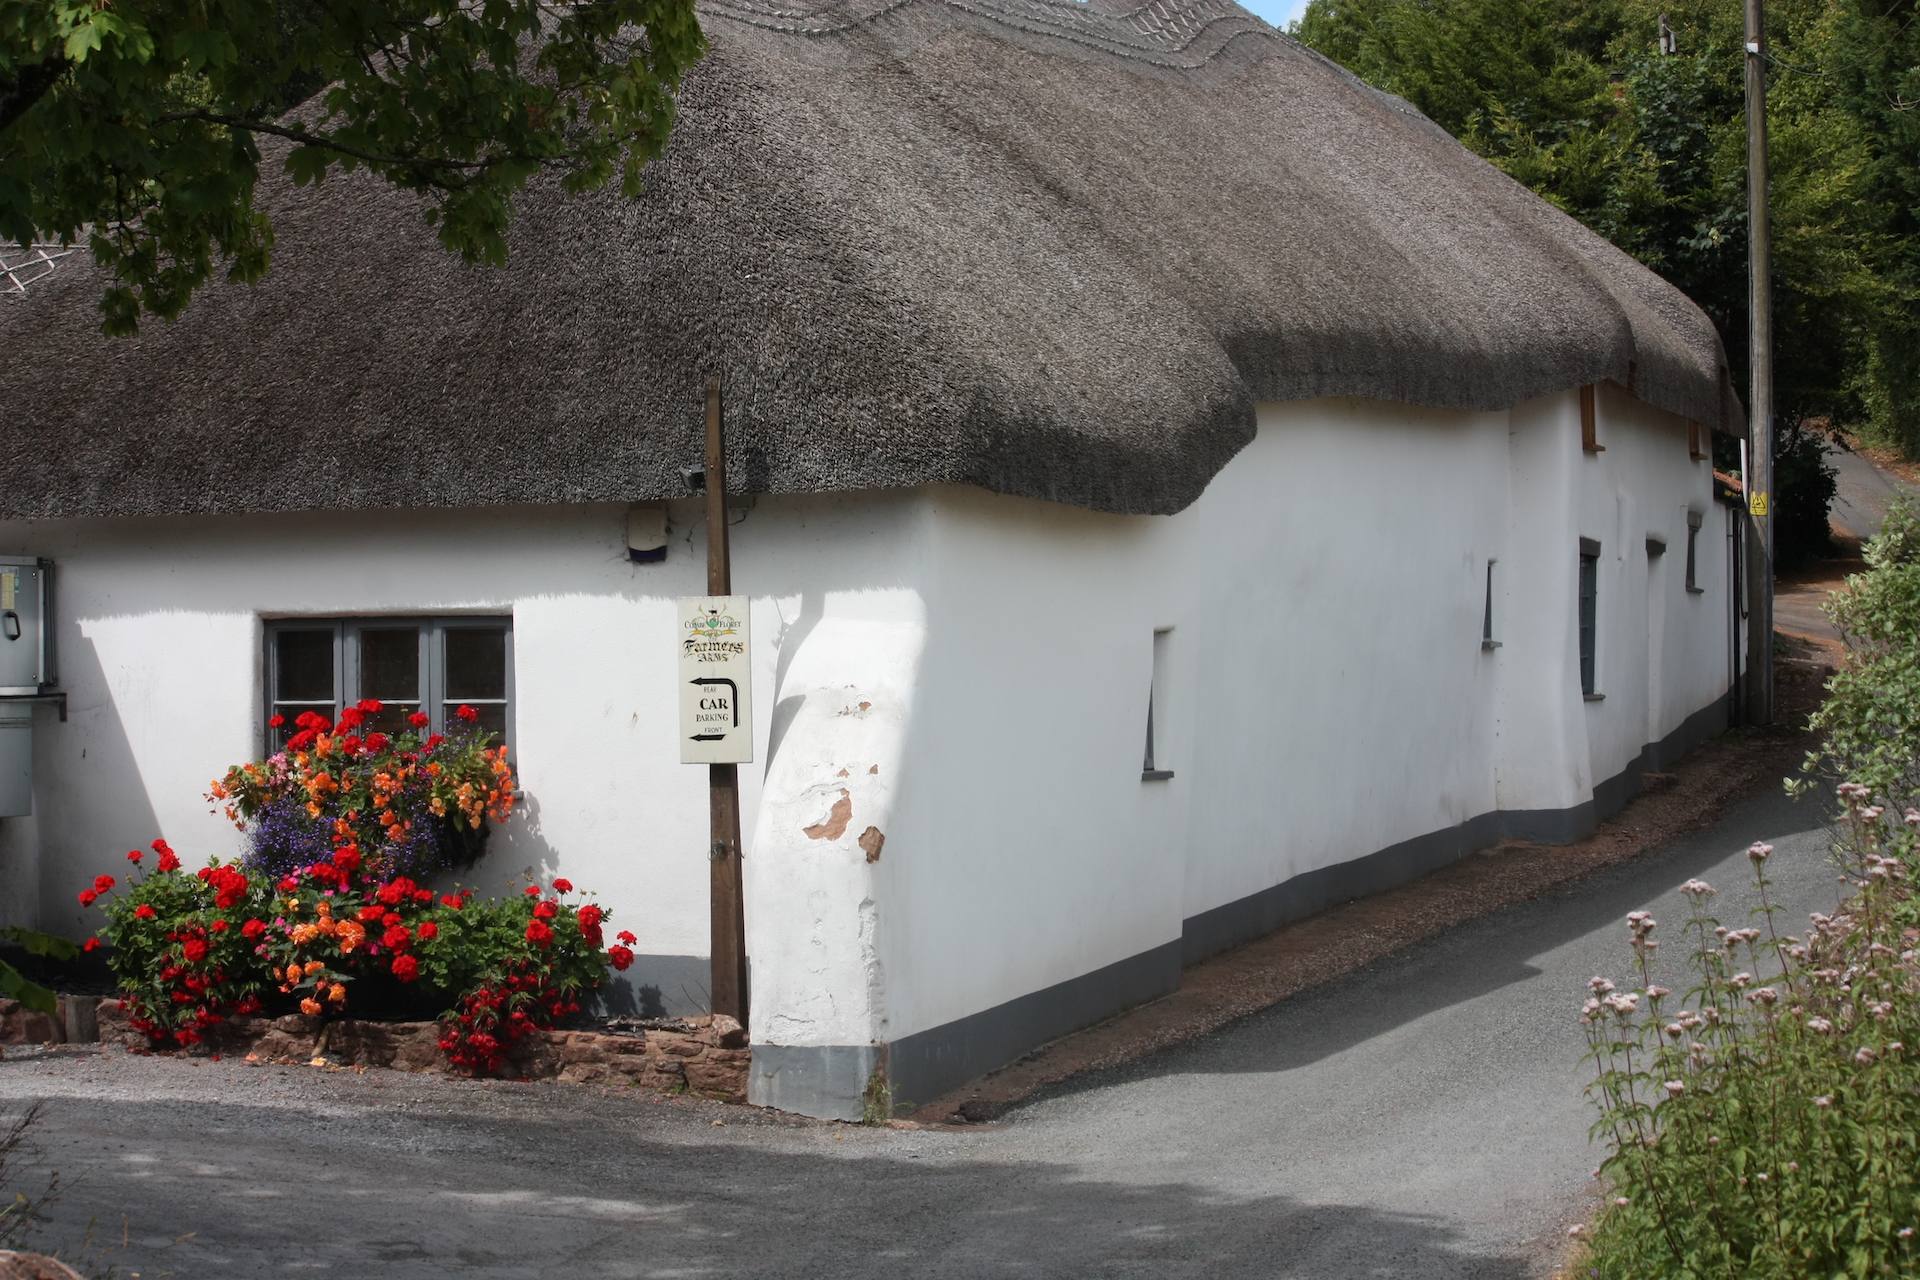 The exterior of a white-washed thatched village pub in the Quantock Hills